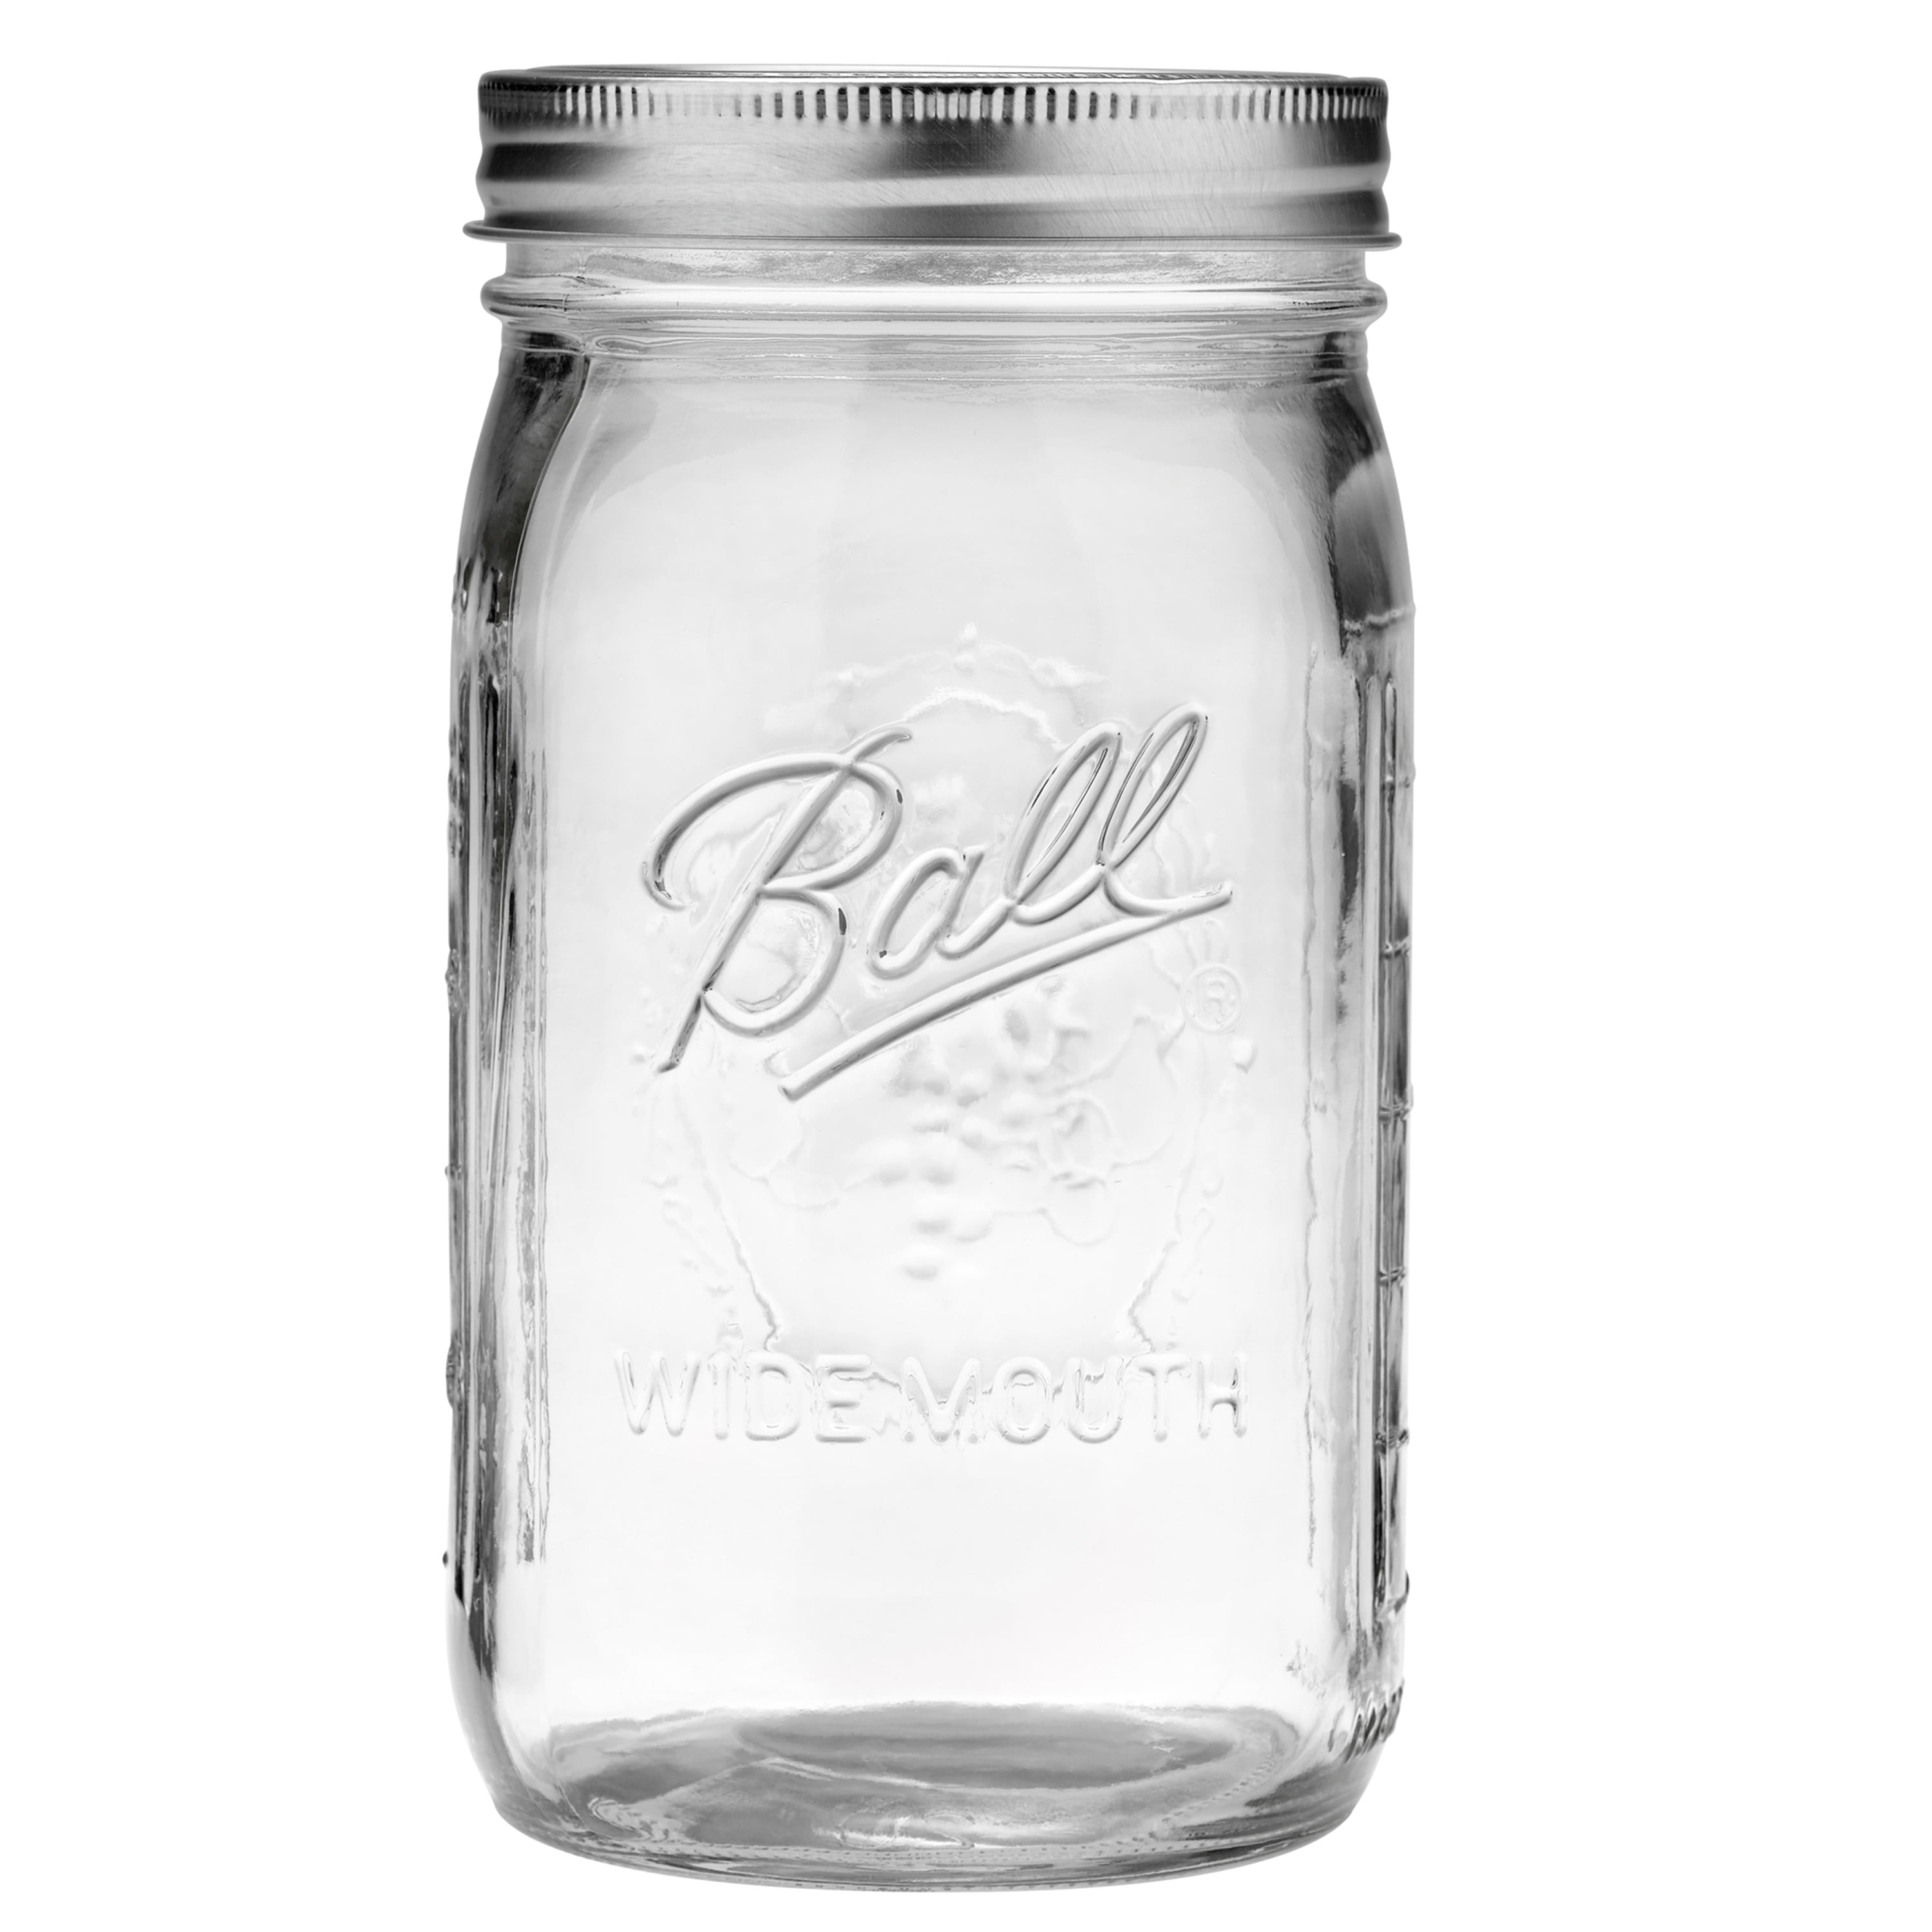 32 Ounces Set of 24 12 Count Ball Glass Mason Jar w/Lid & Band Wide Mouth